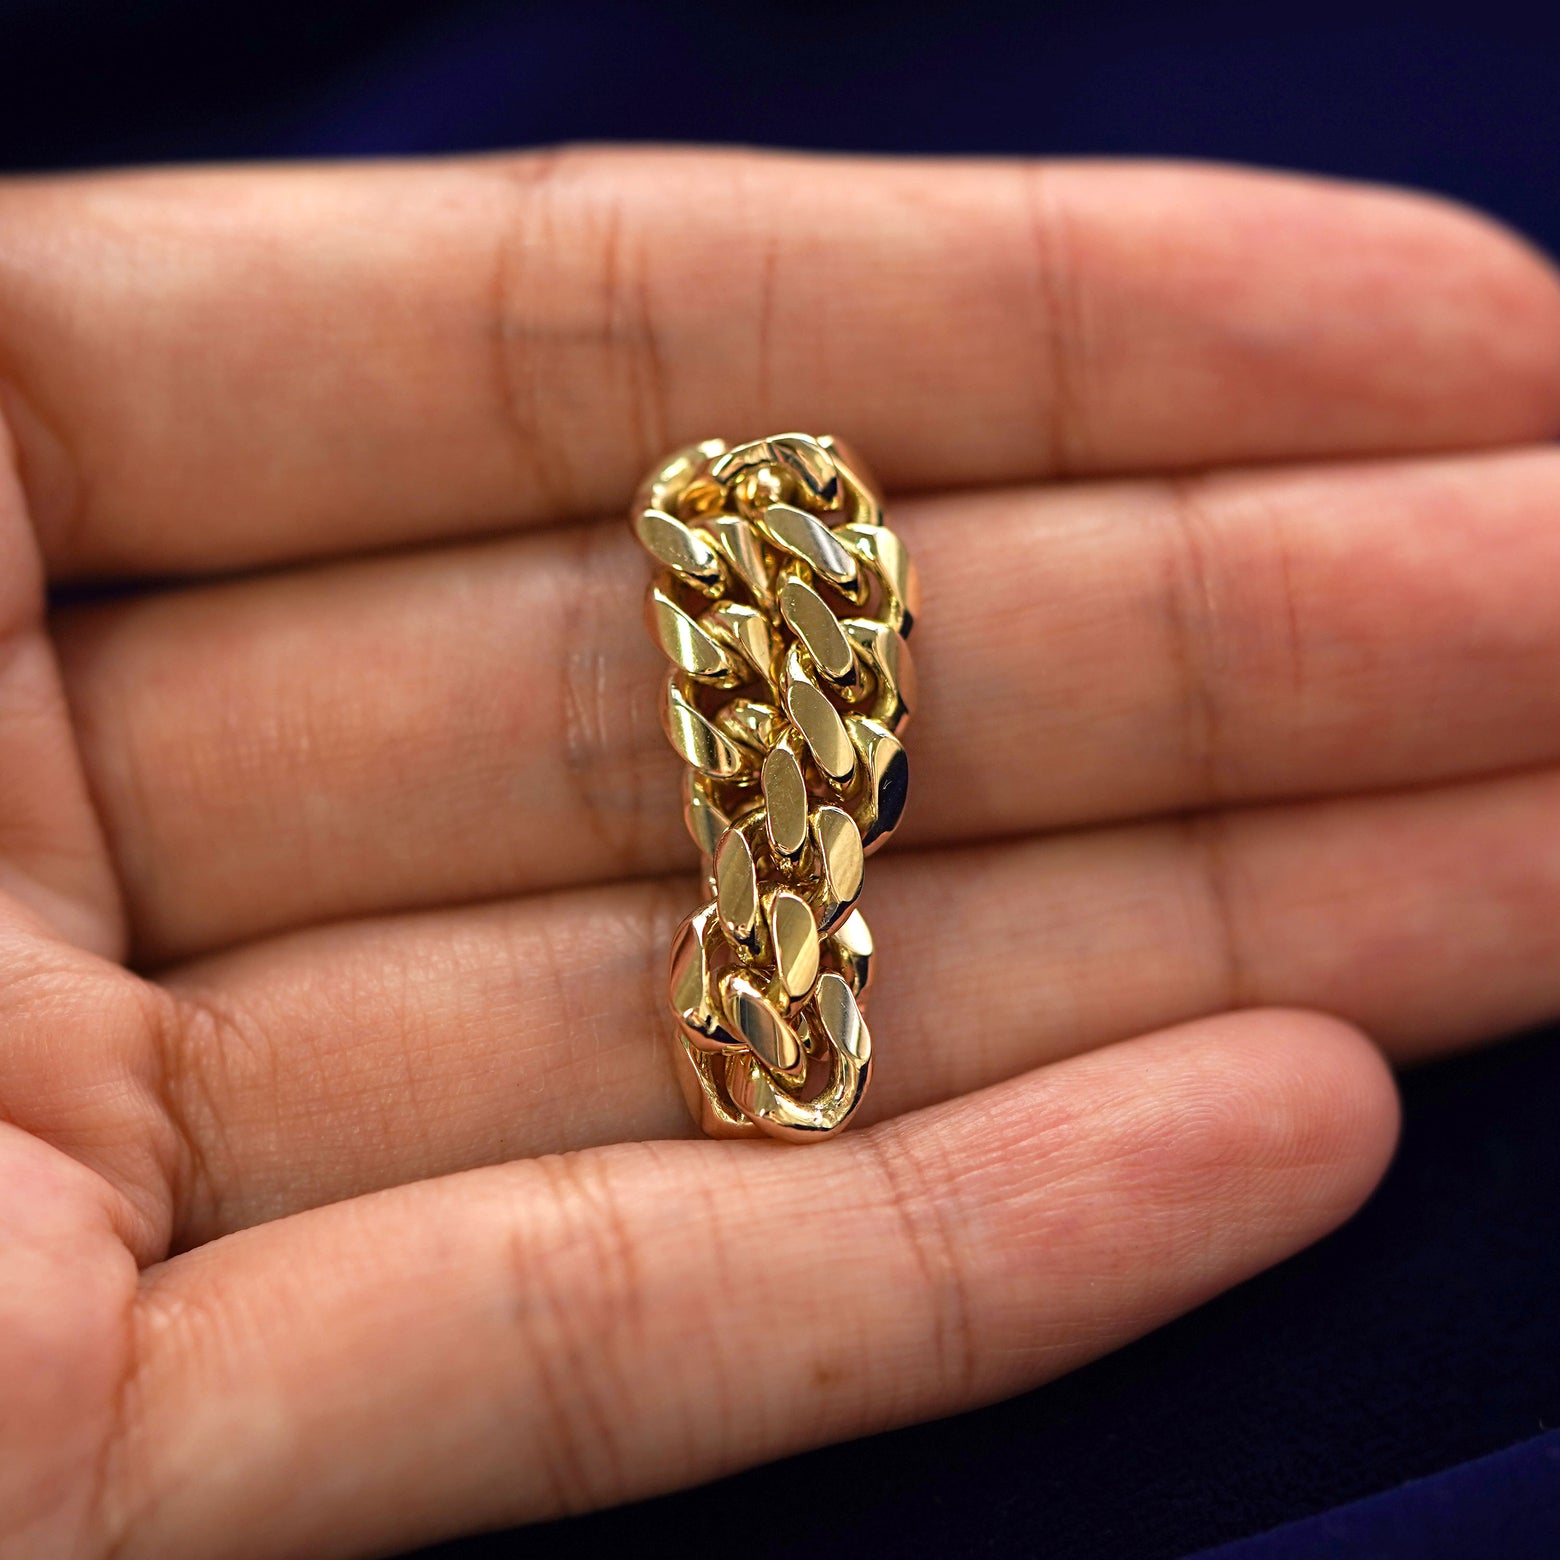 A solid yellow gold Miami Ring twisted a model's finger